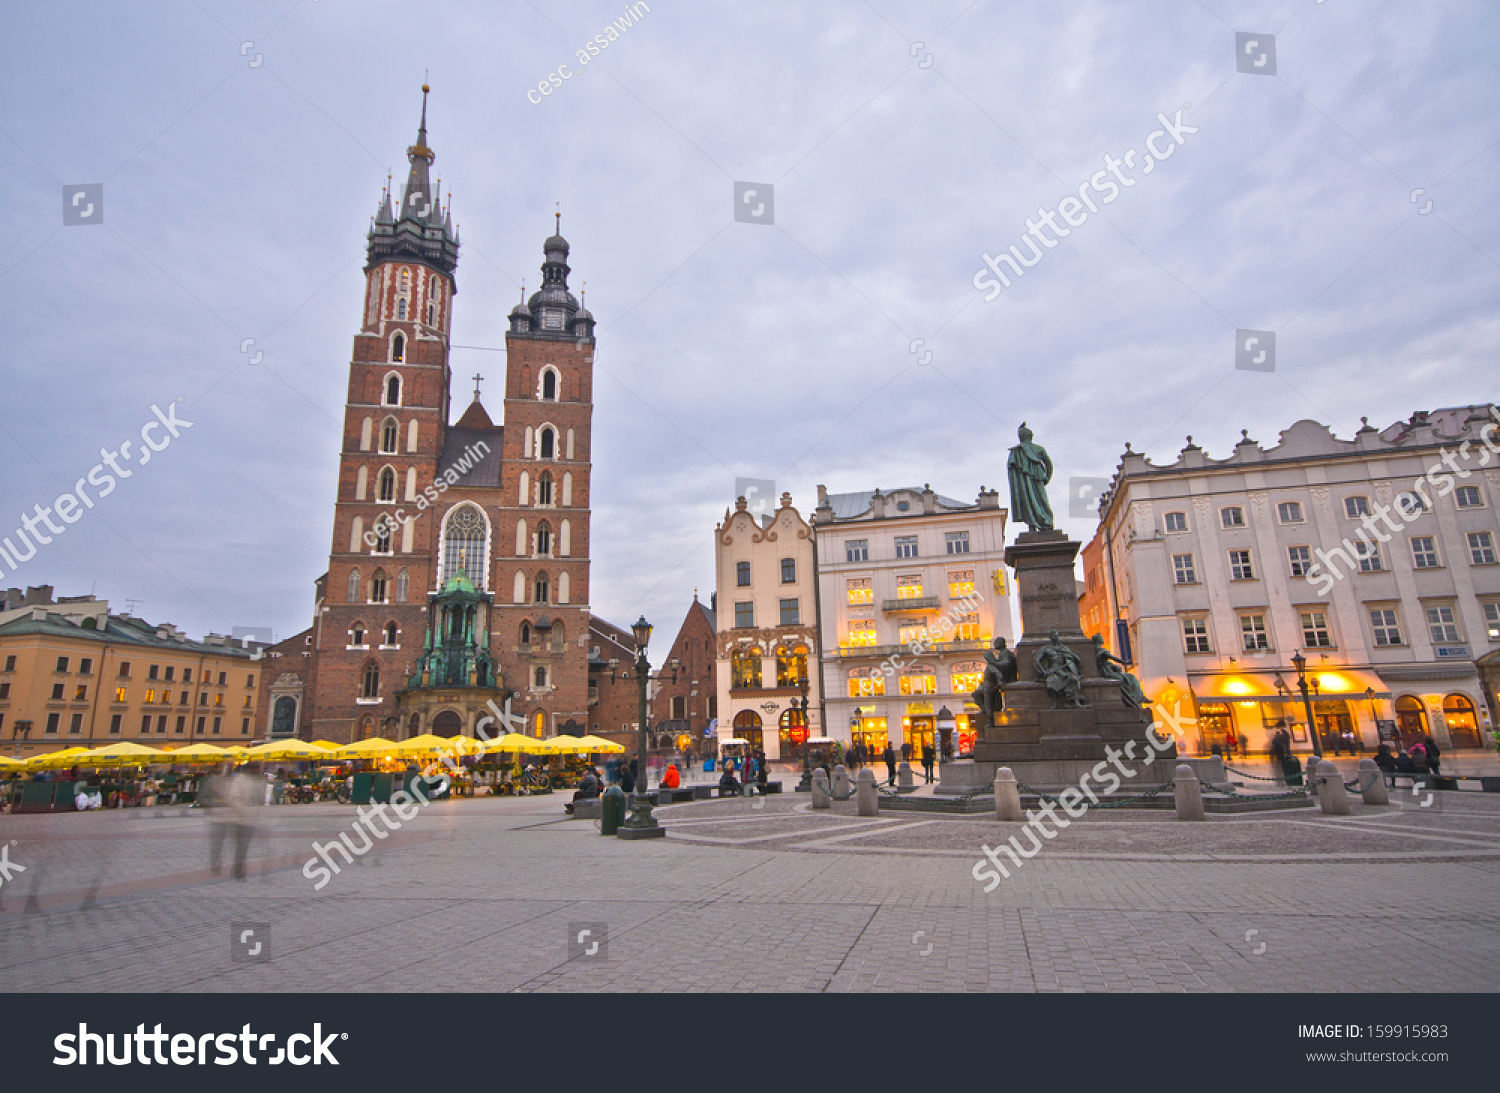 KRAKOW, POLAND - MARCH 10: St. Mary's Church in historical center of Krakow, March 10, 2012 in Krakow, Poland. This year the city was visited by 8.1 million tourists, which is the highest level. #159915983